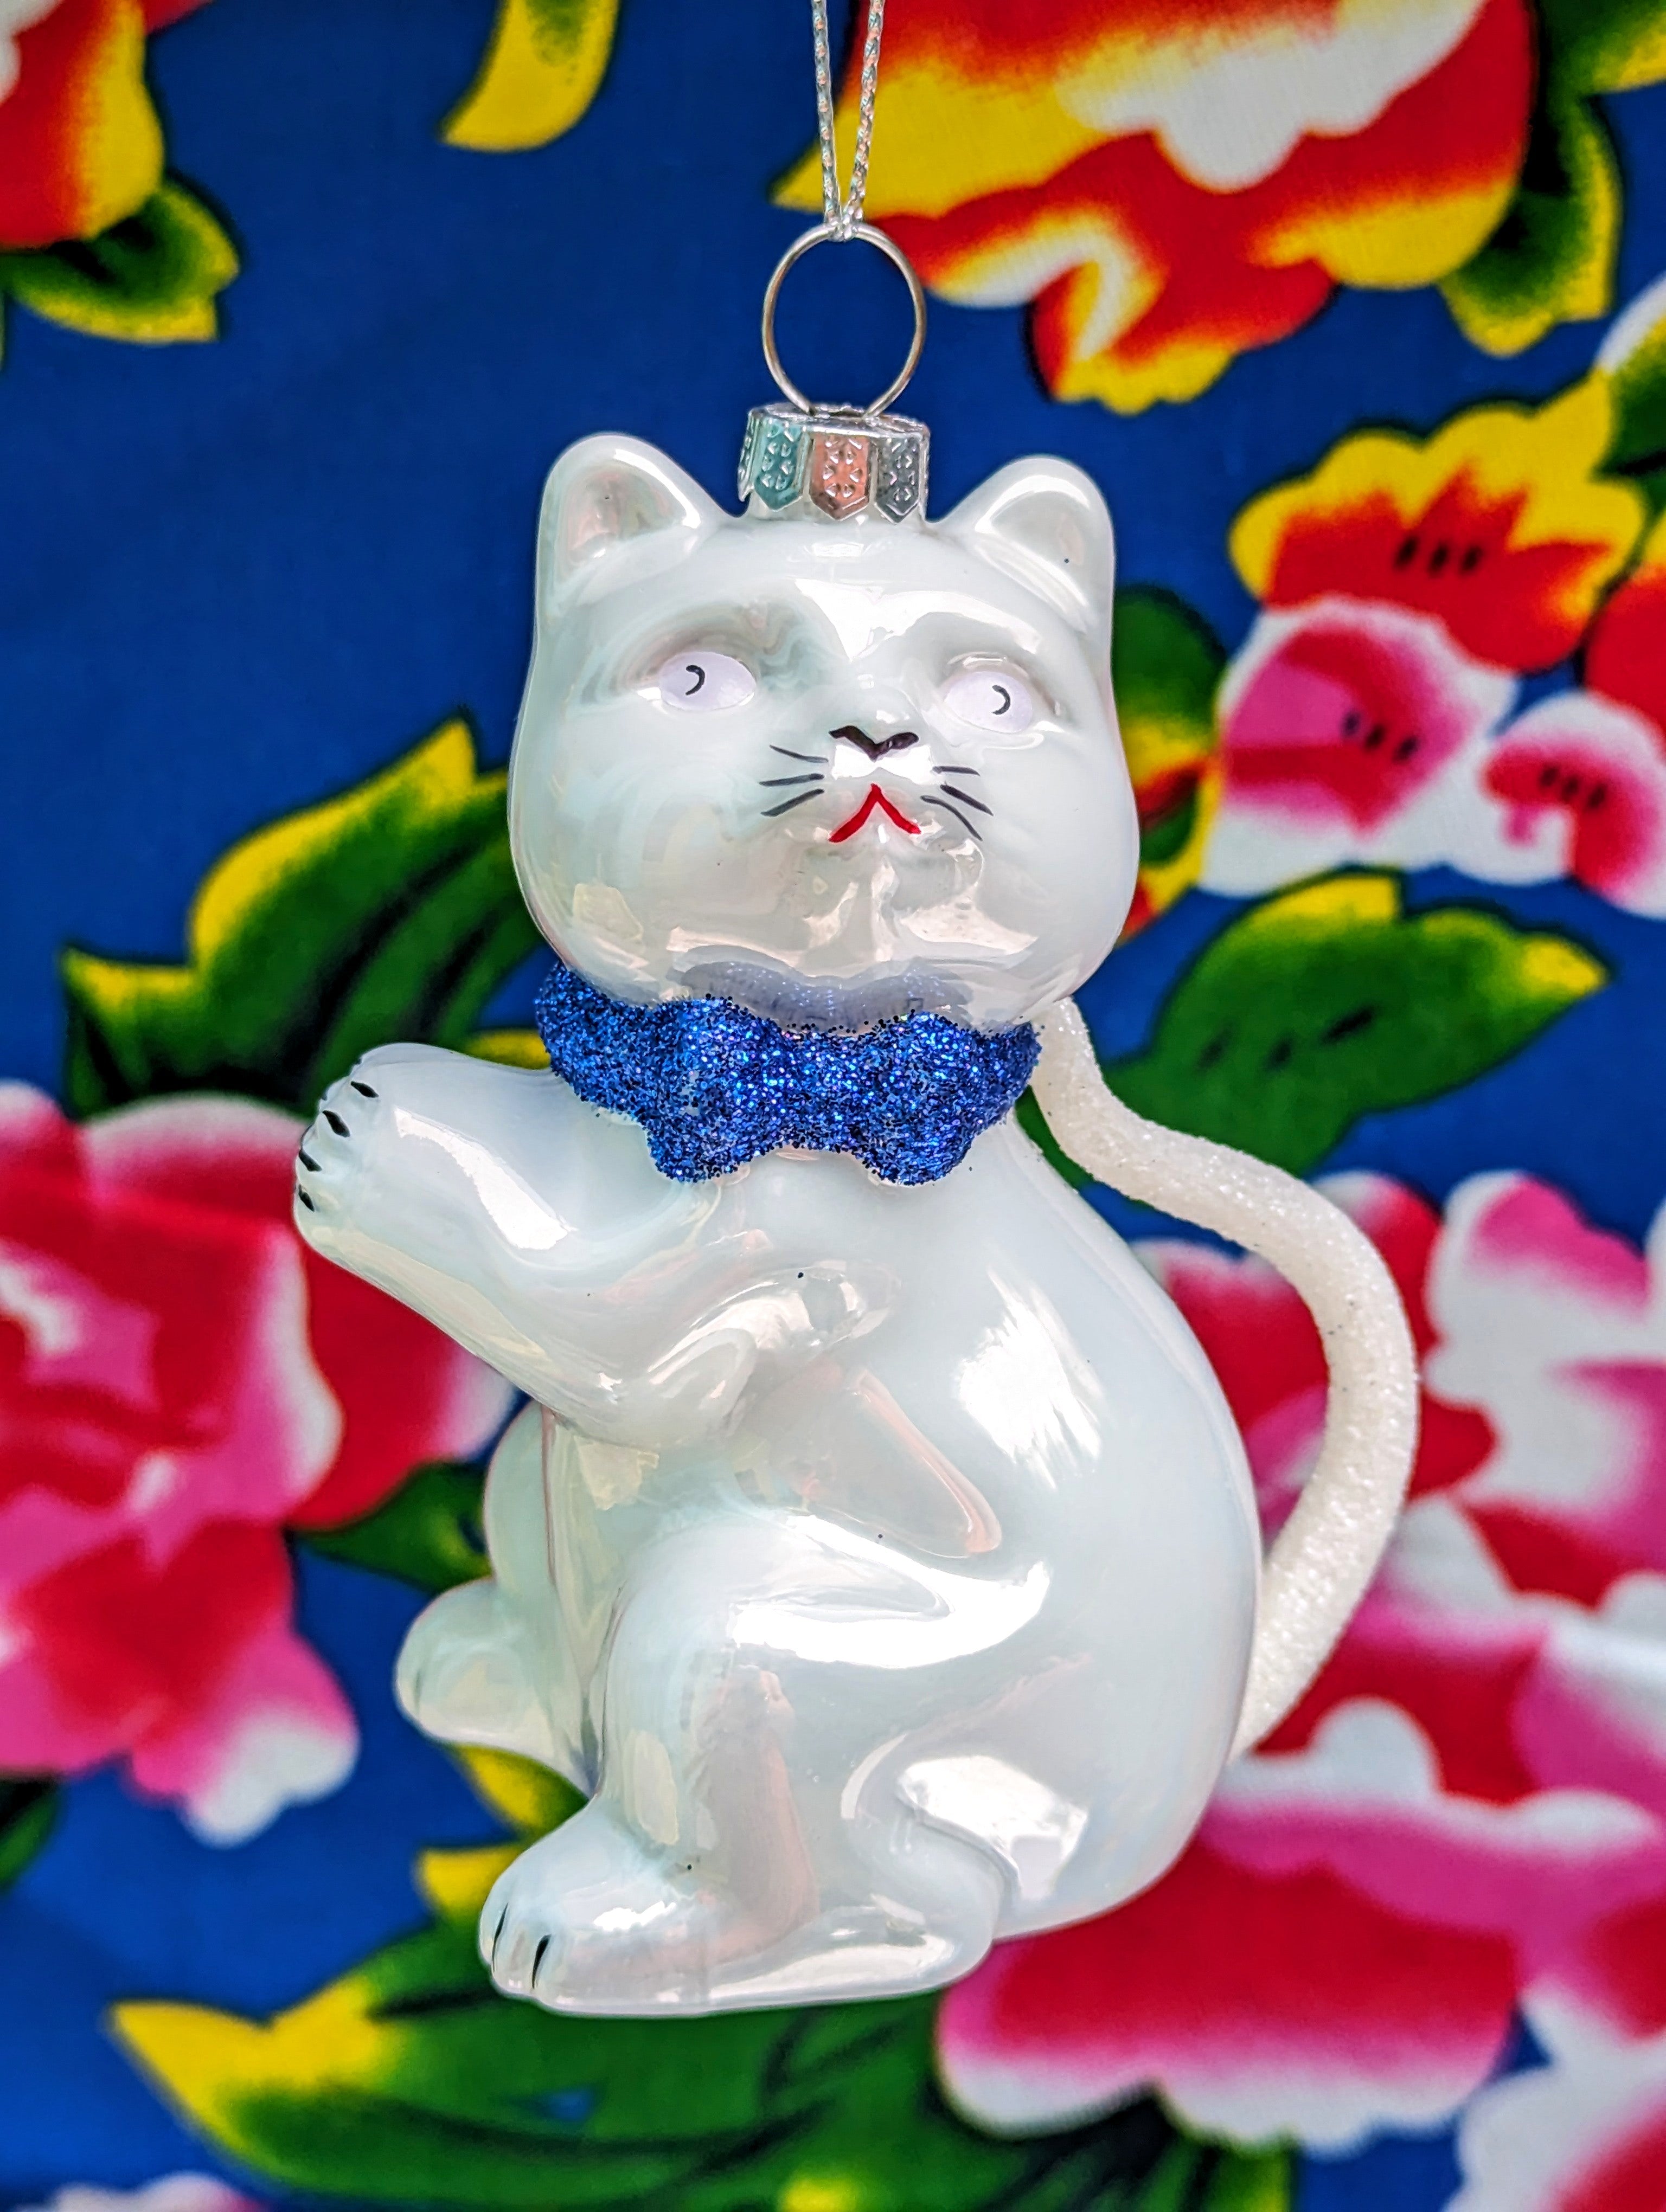 Inspired by vintage porcelain Chinese teapots this most cute cat is the sweetest addition to your Christmas tree or festive holiday display.

Hand finished glass decoration 

Size 10 x 8 x 5cm

Fragile, handle with care

